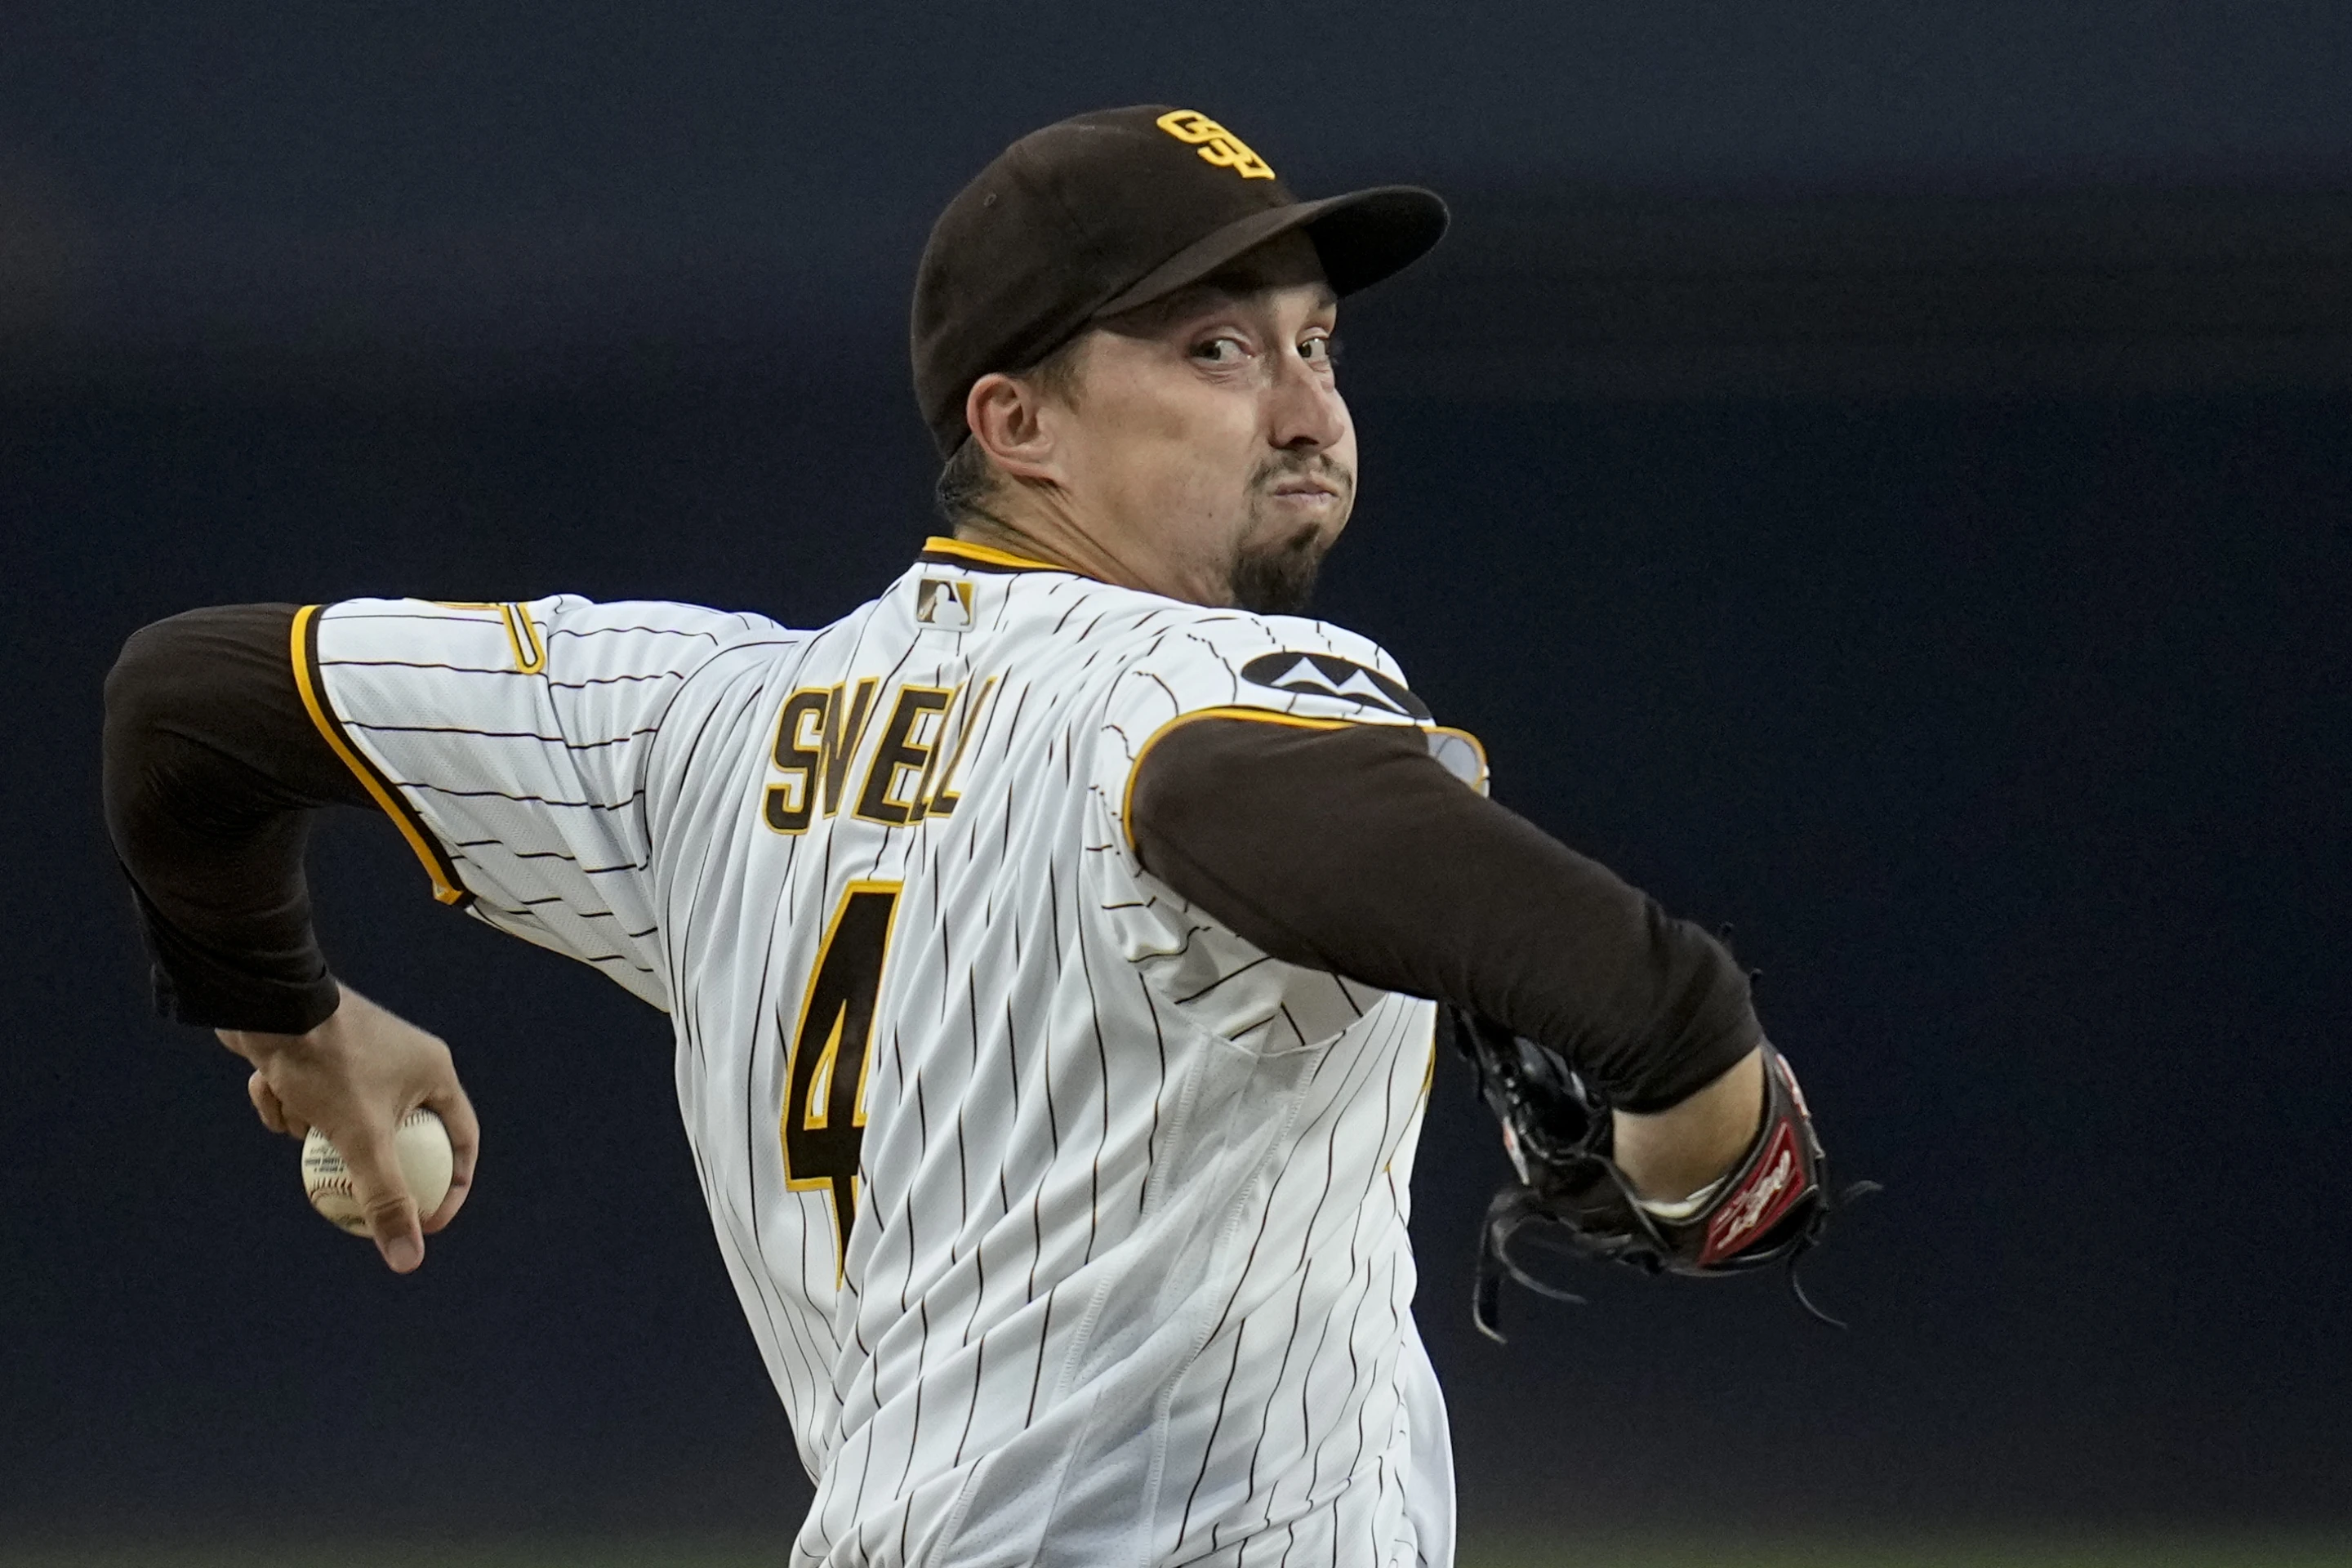 Pitcher Blake Snell of the San Diego Padres competes during the first inning in the game against the Colorado Rockeis at Petco Park in San Diego, California, September 19, 2023. /AP